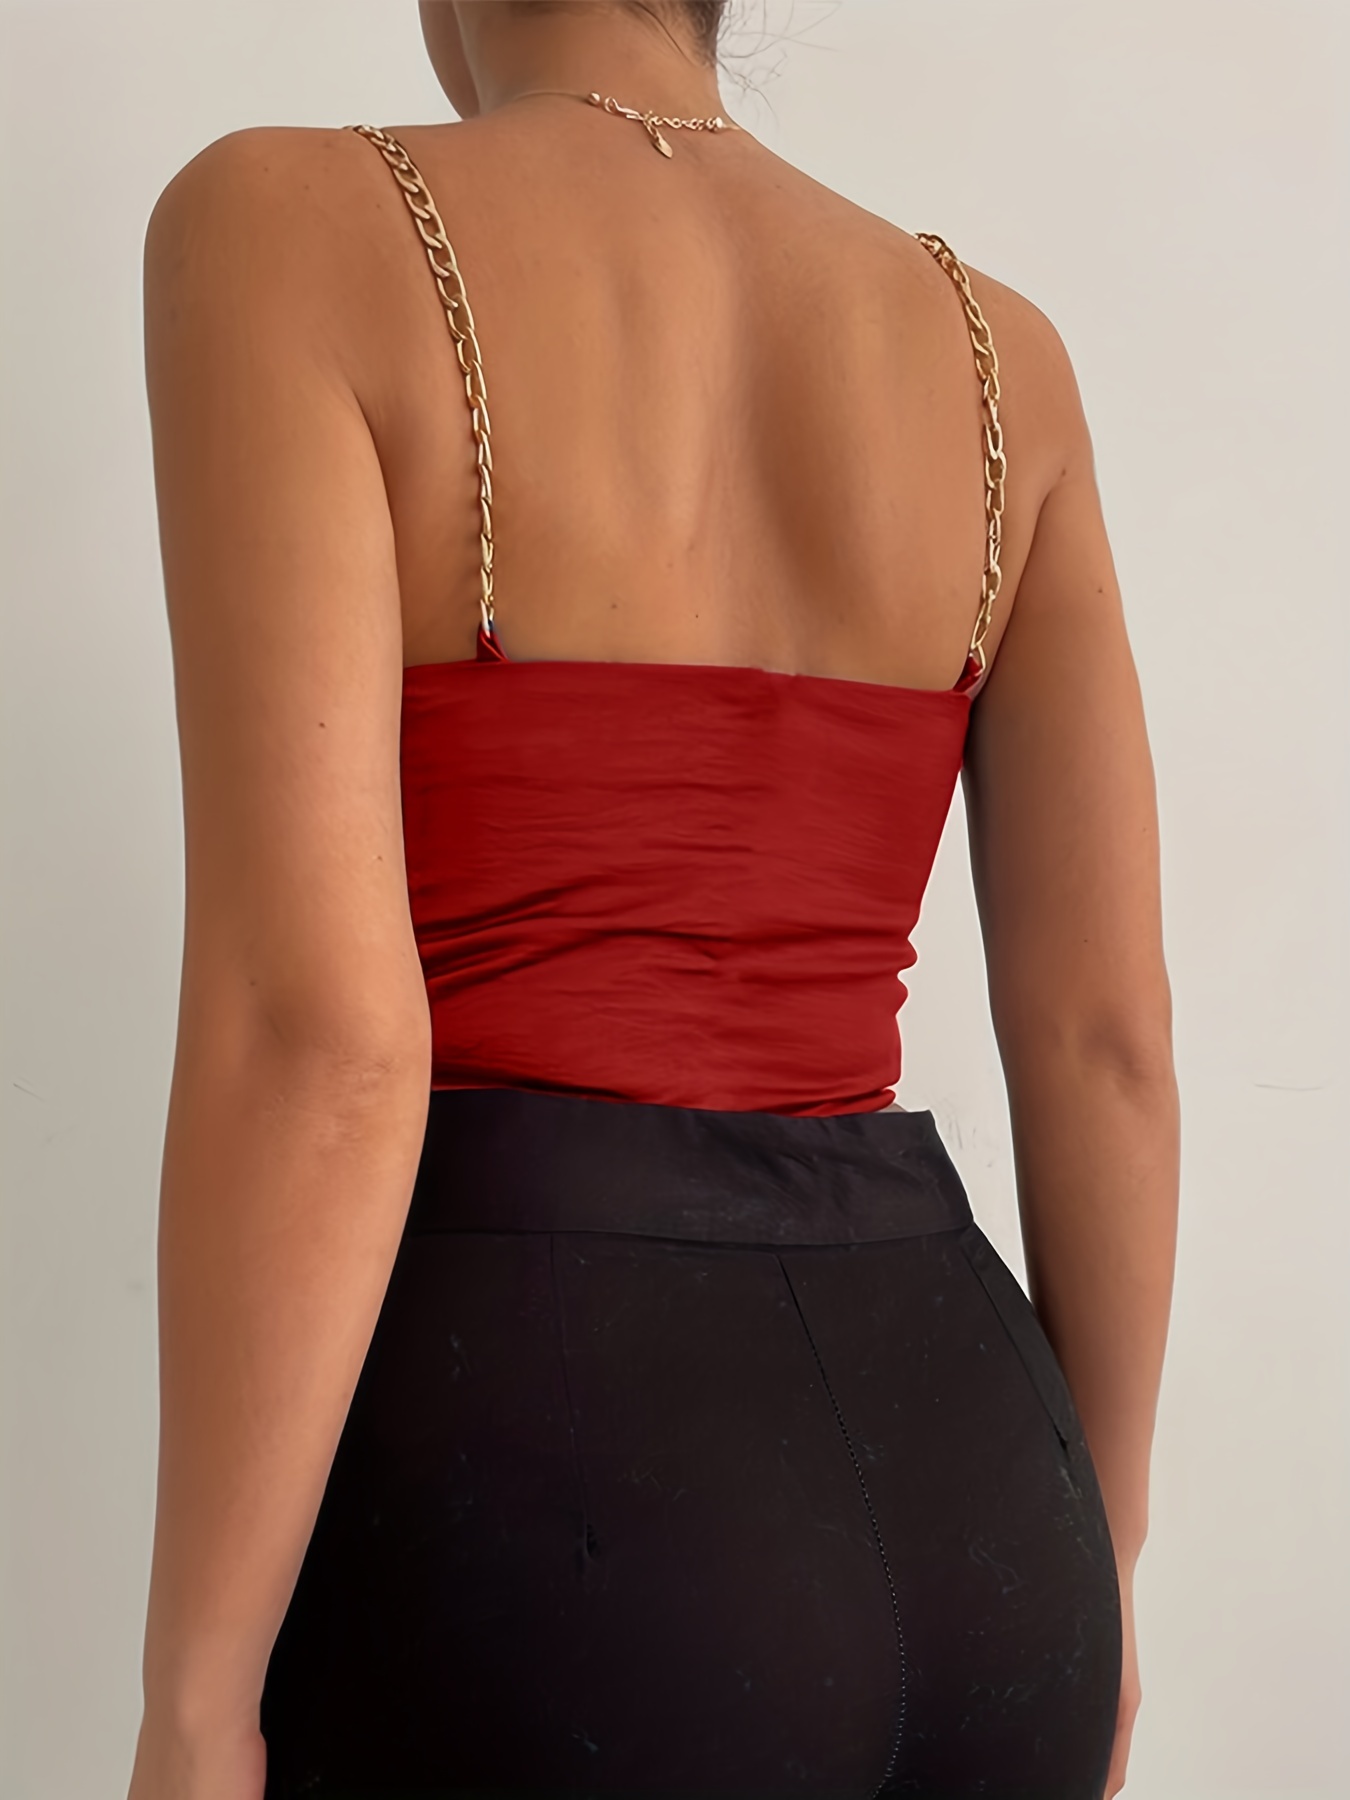 Womens Thin Strap Camisole - Red 